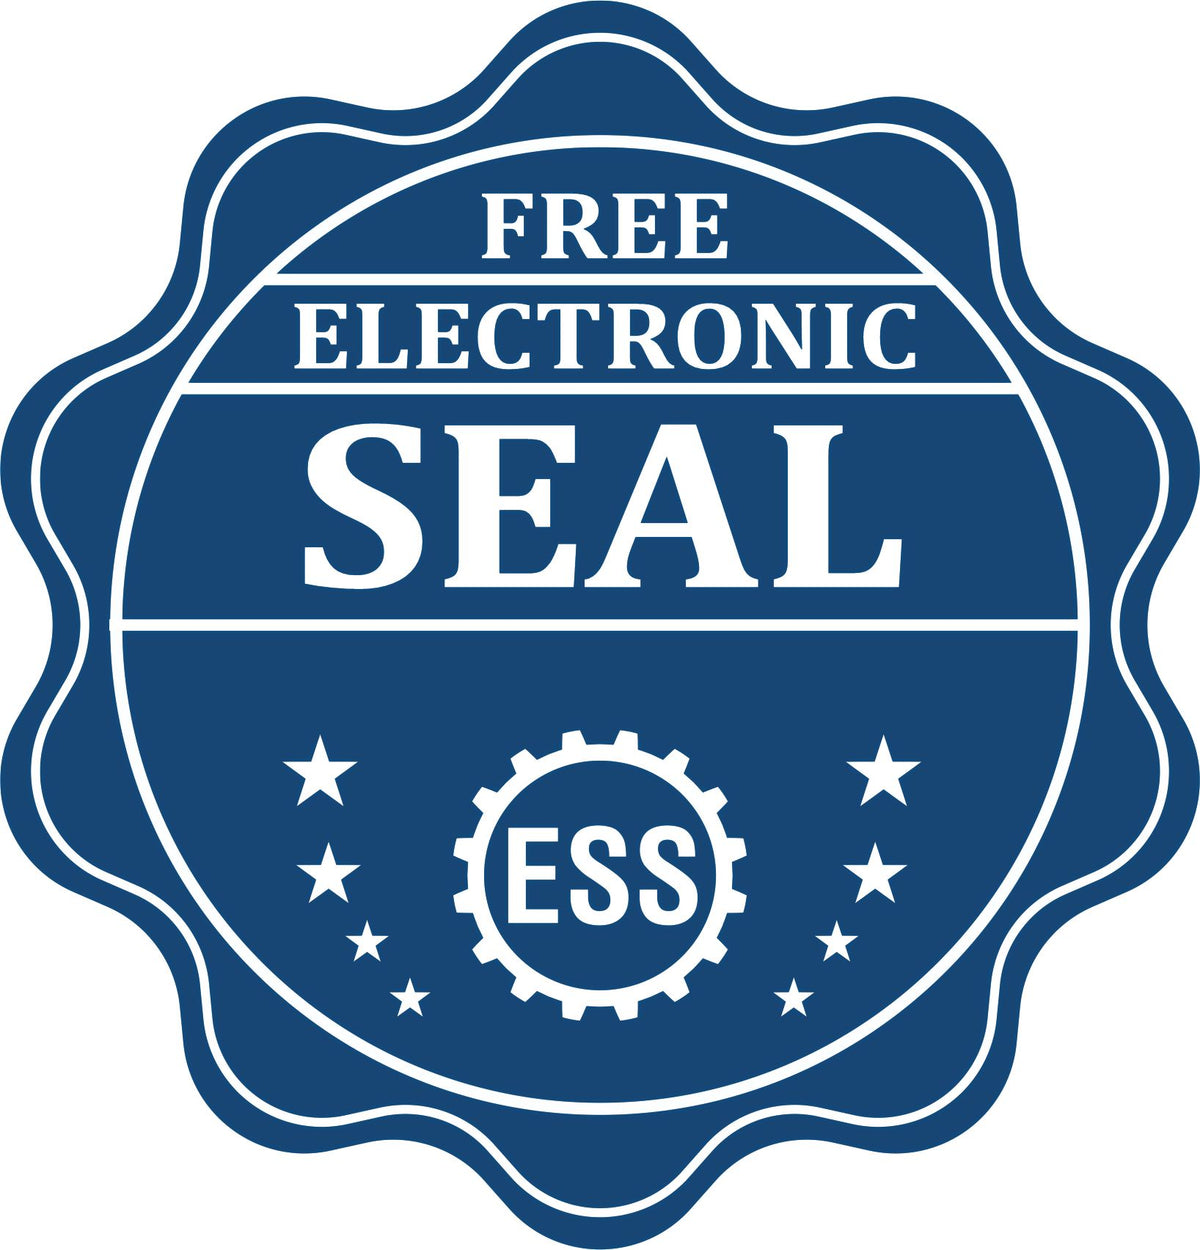 A badge showing a free electronic seal for the Handheld Delaware Professional Engineer Embosser with stars and the ESS gear on the emblem.